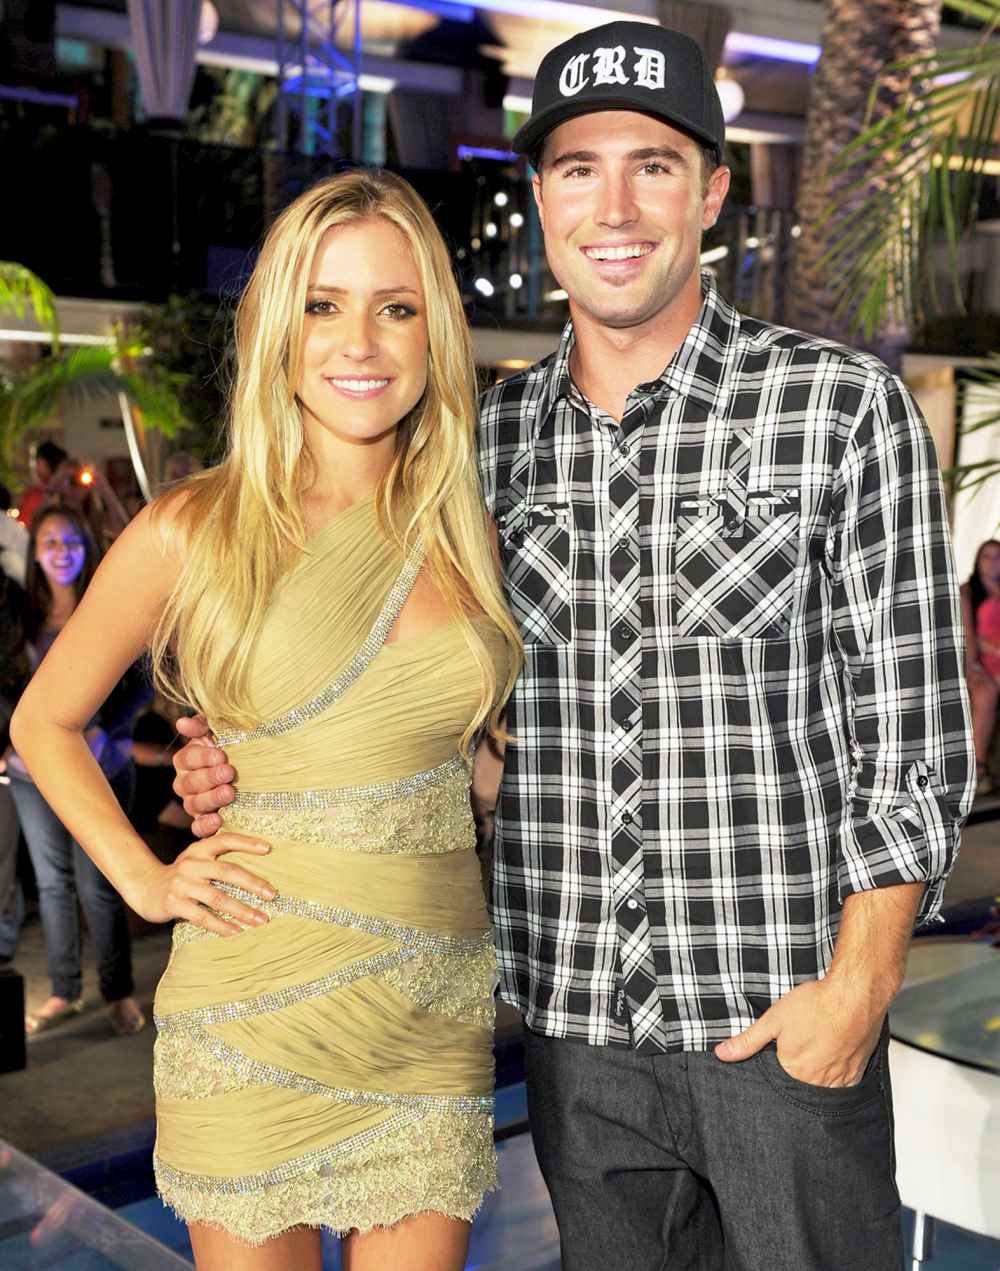 Kristin Cavallari and Brody Jenner attend MTV's "The Hills Live: A Hollywood Ending" 2010 Finale event in Hollywood, California.